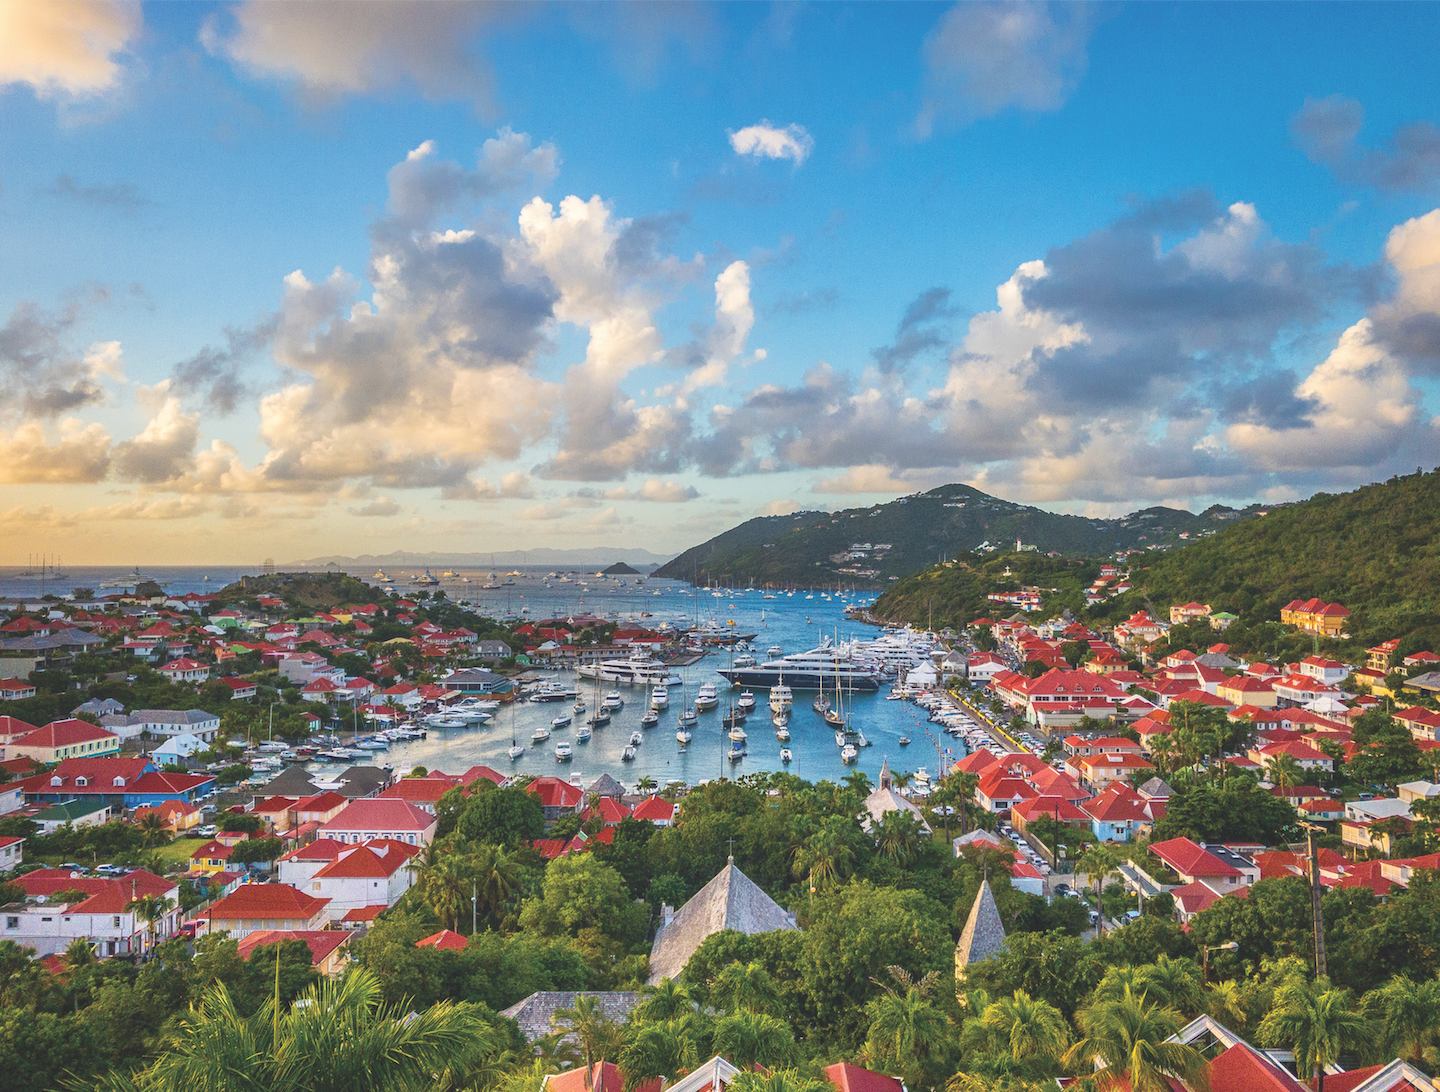 The Ultimate St Barts Island Guide: Dine, Drink, Stay, & Play